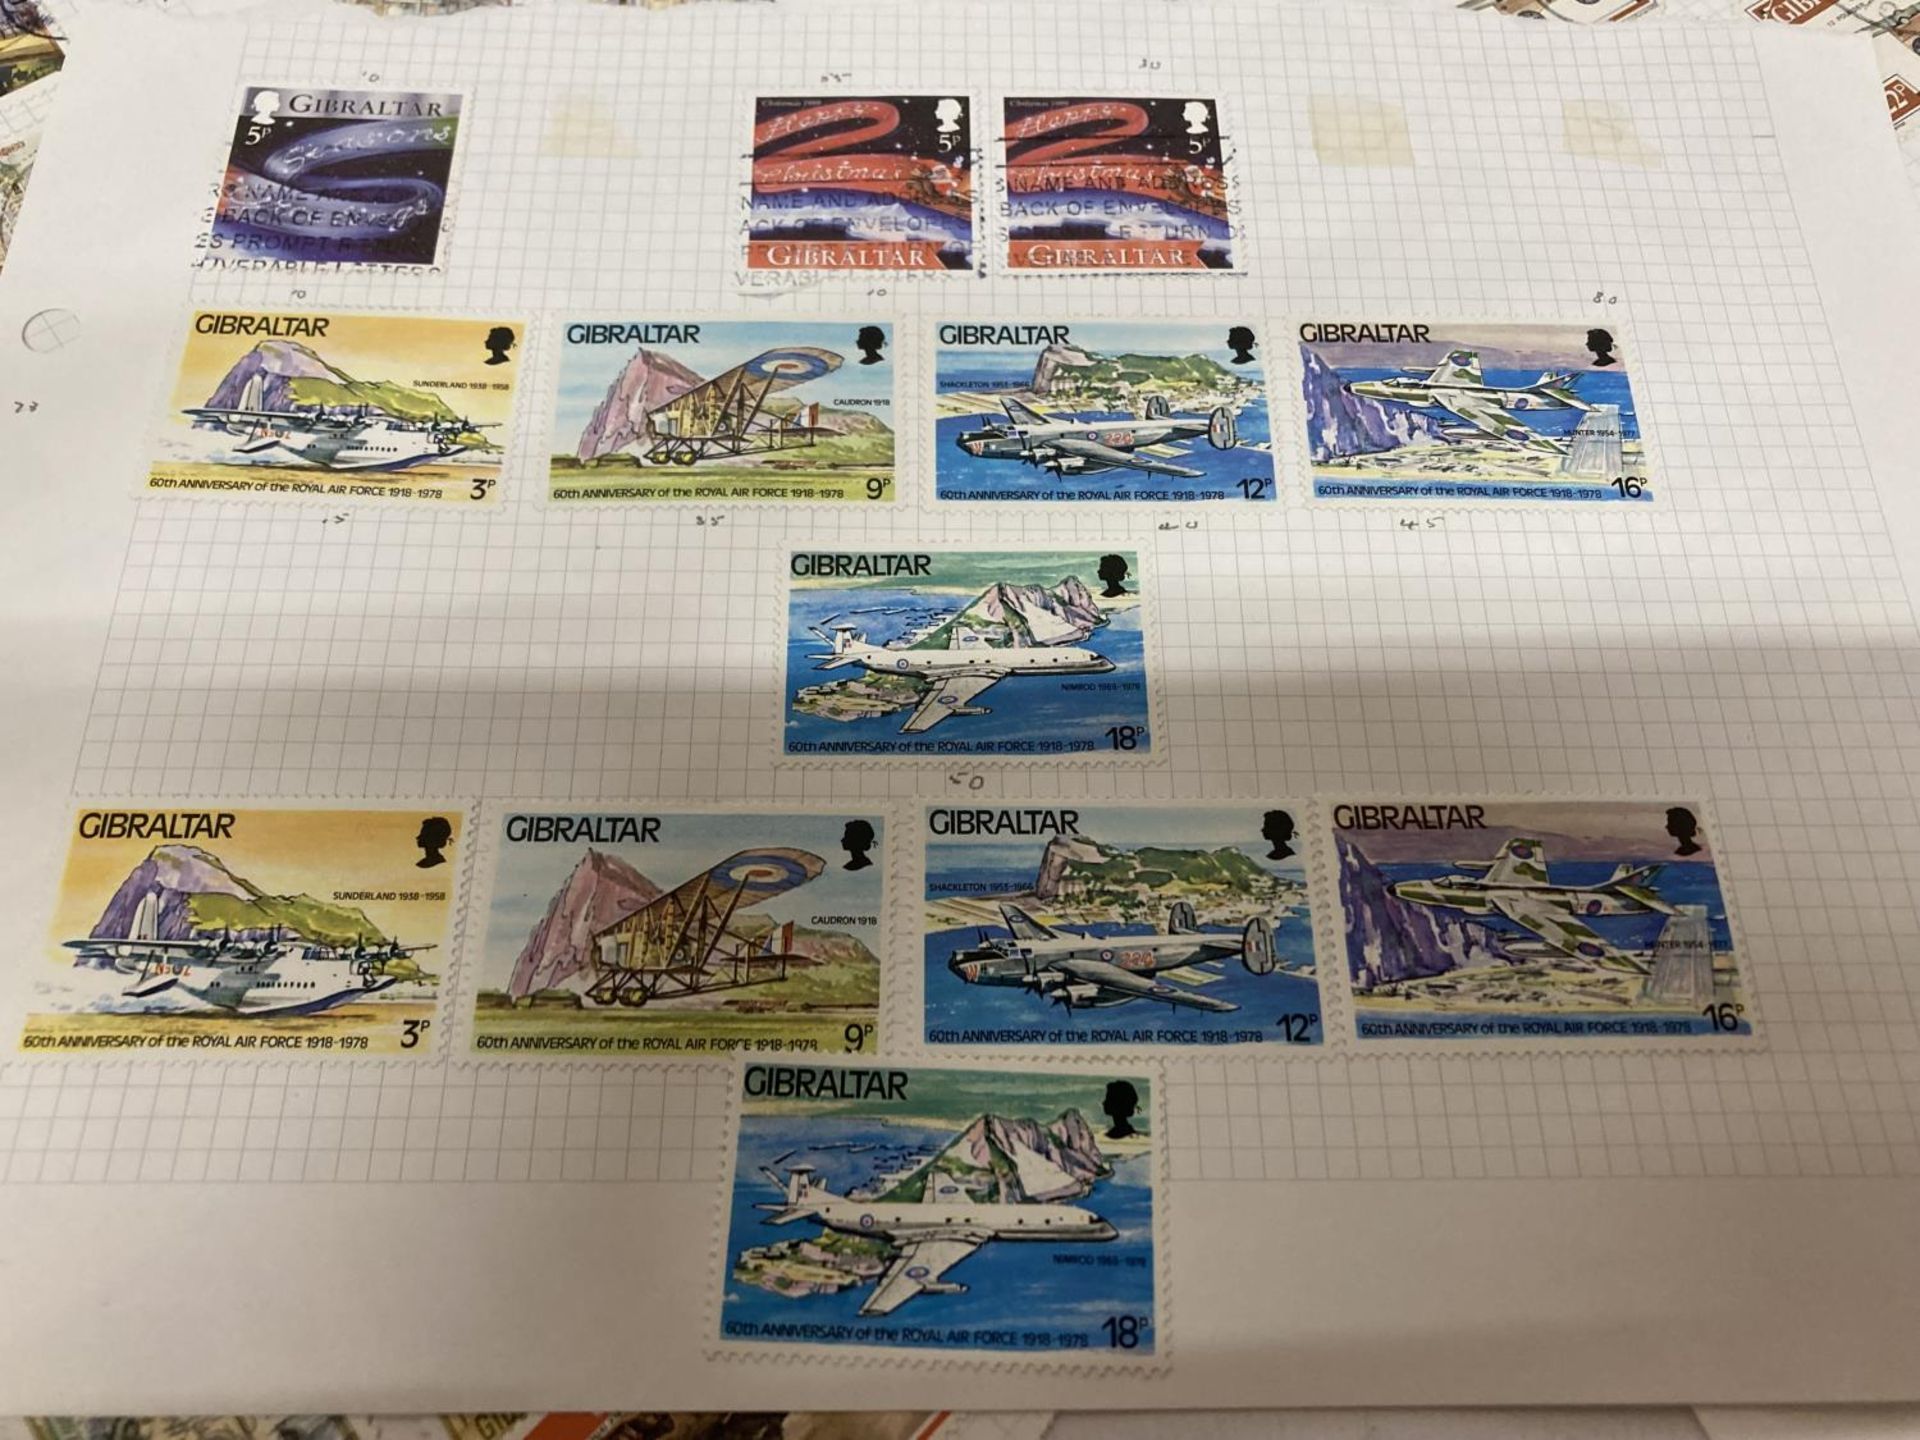 TEN PLUS SHEETS CONTAINING STAMPS FROM GIBRALTA - Image 3 of 6